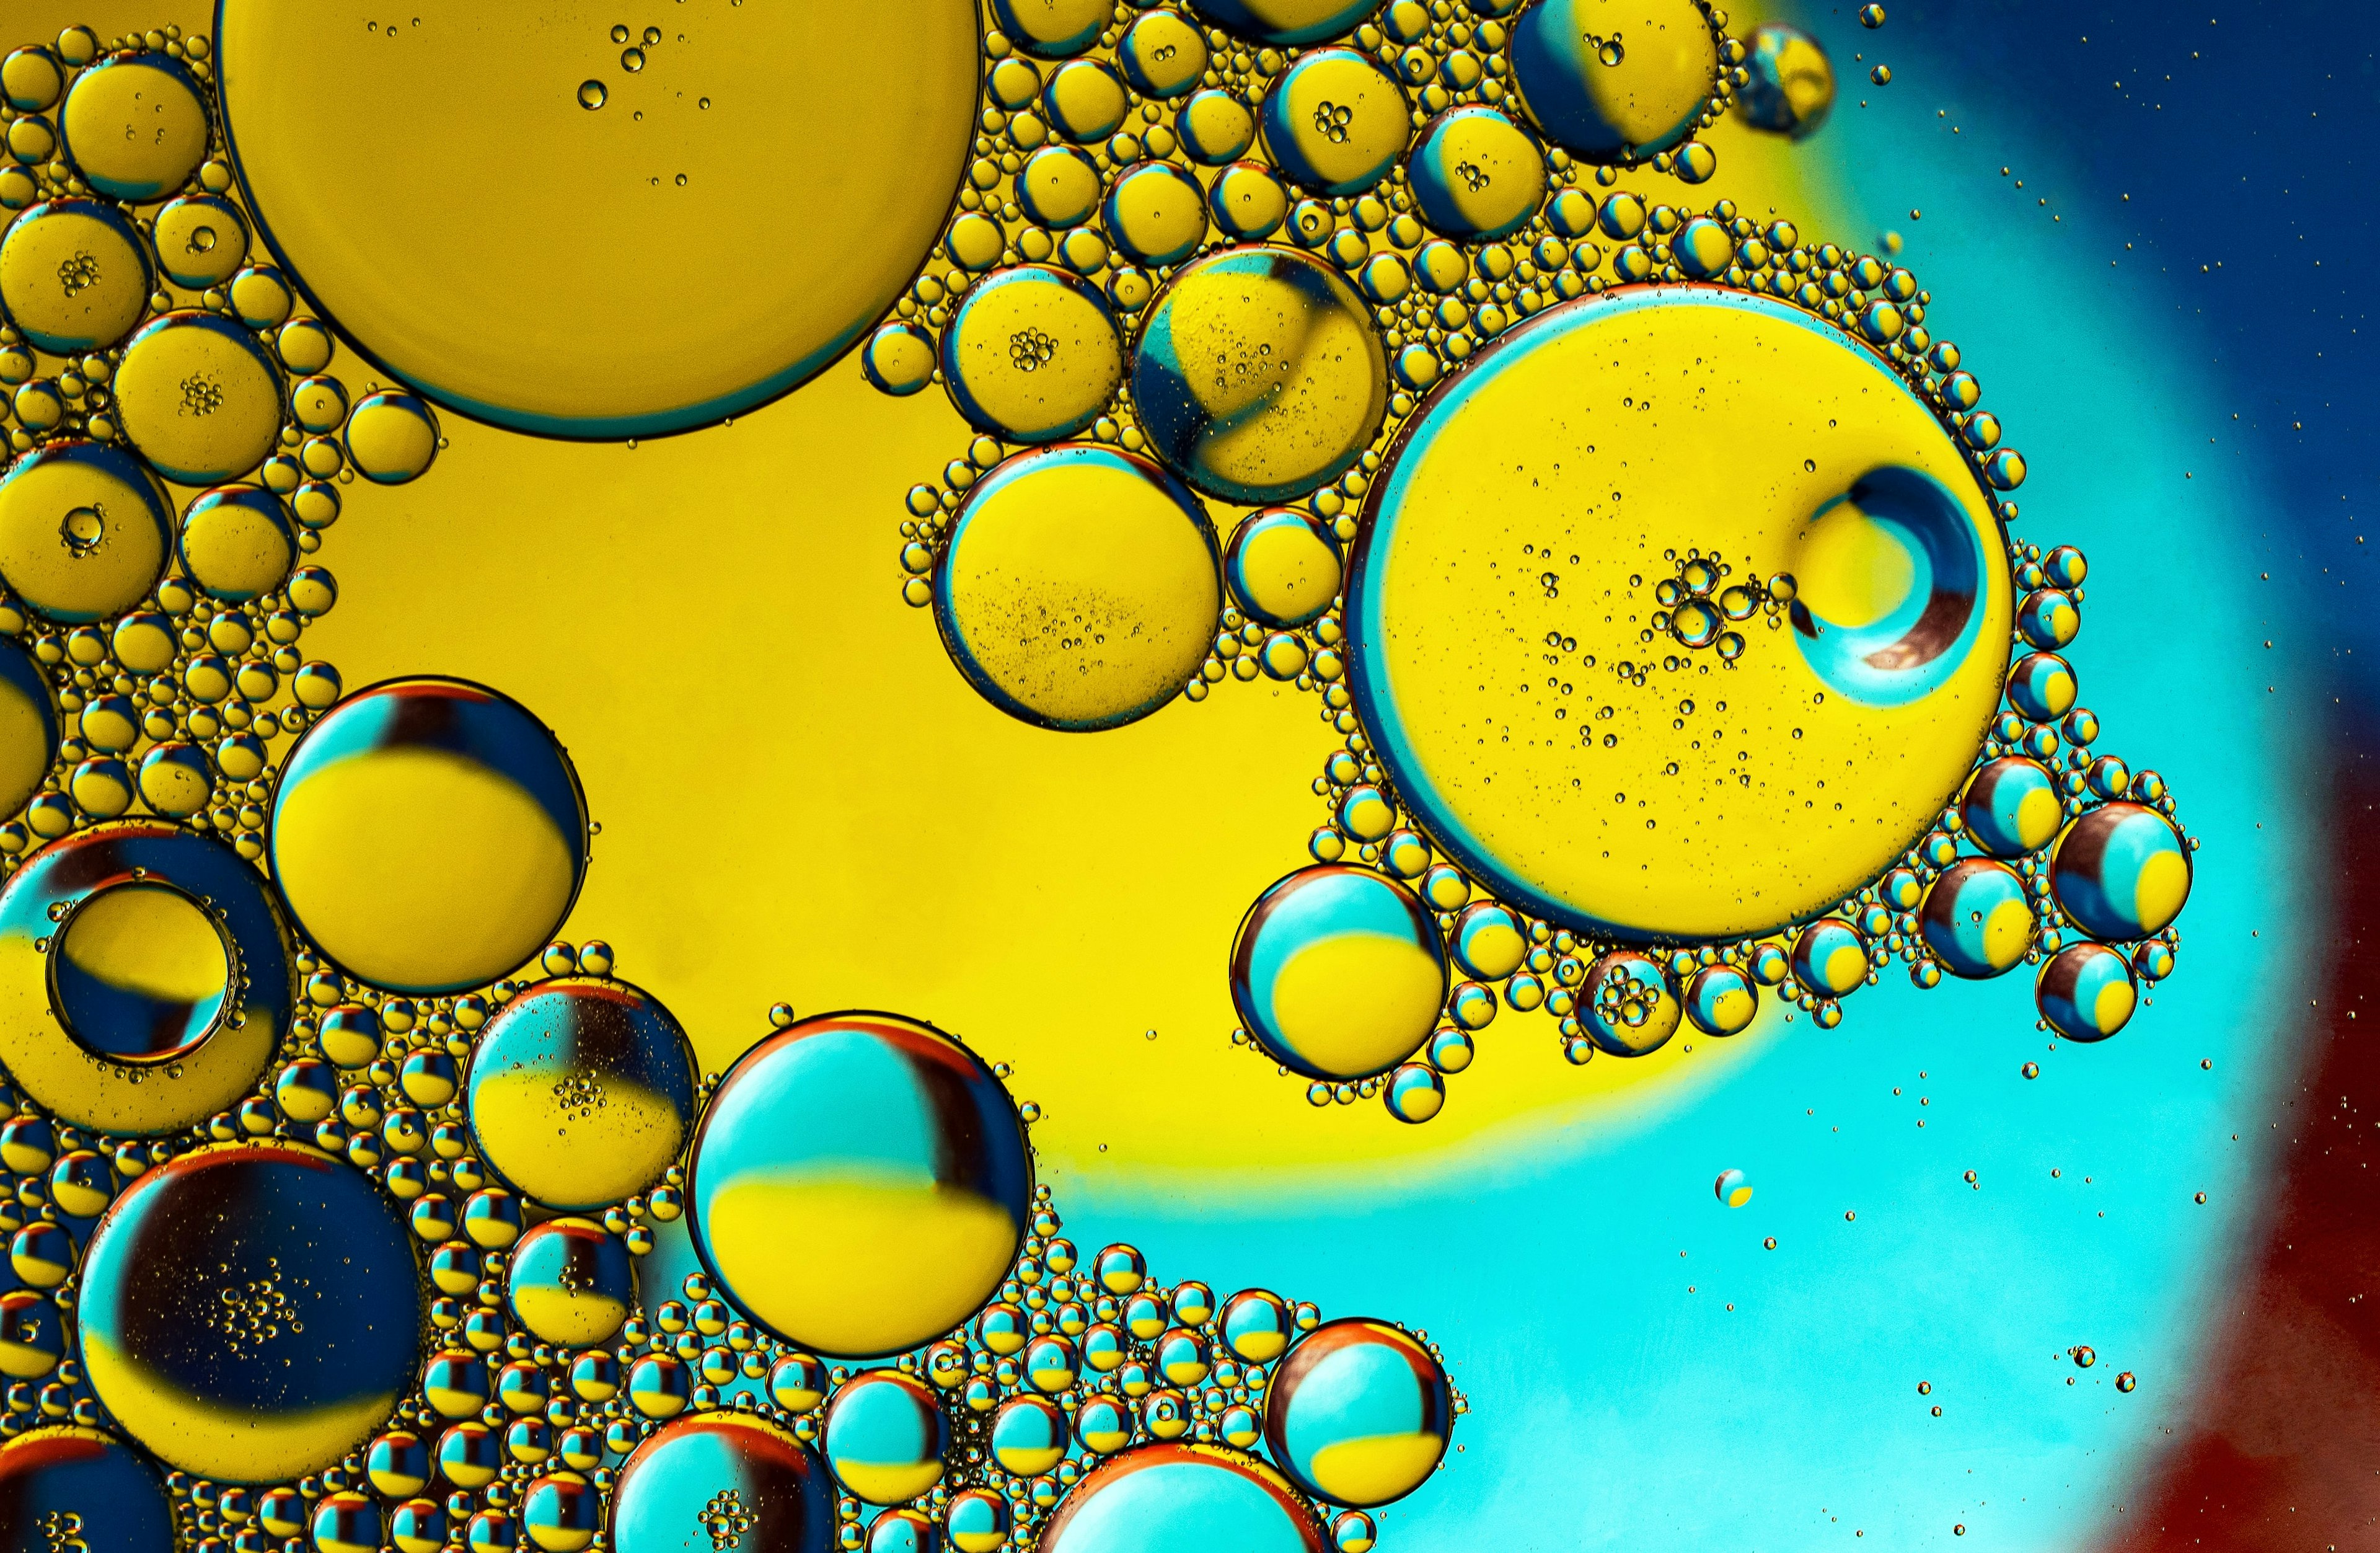 bubbles against a bright blue and yellow background